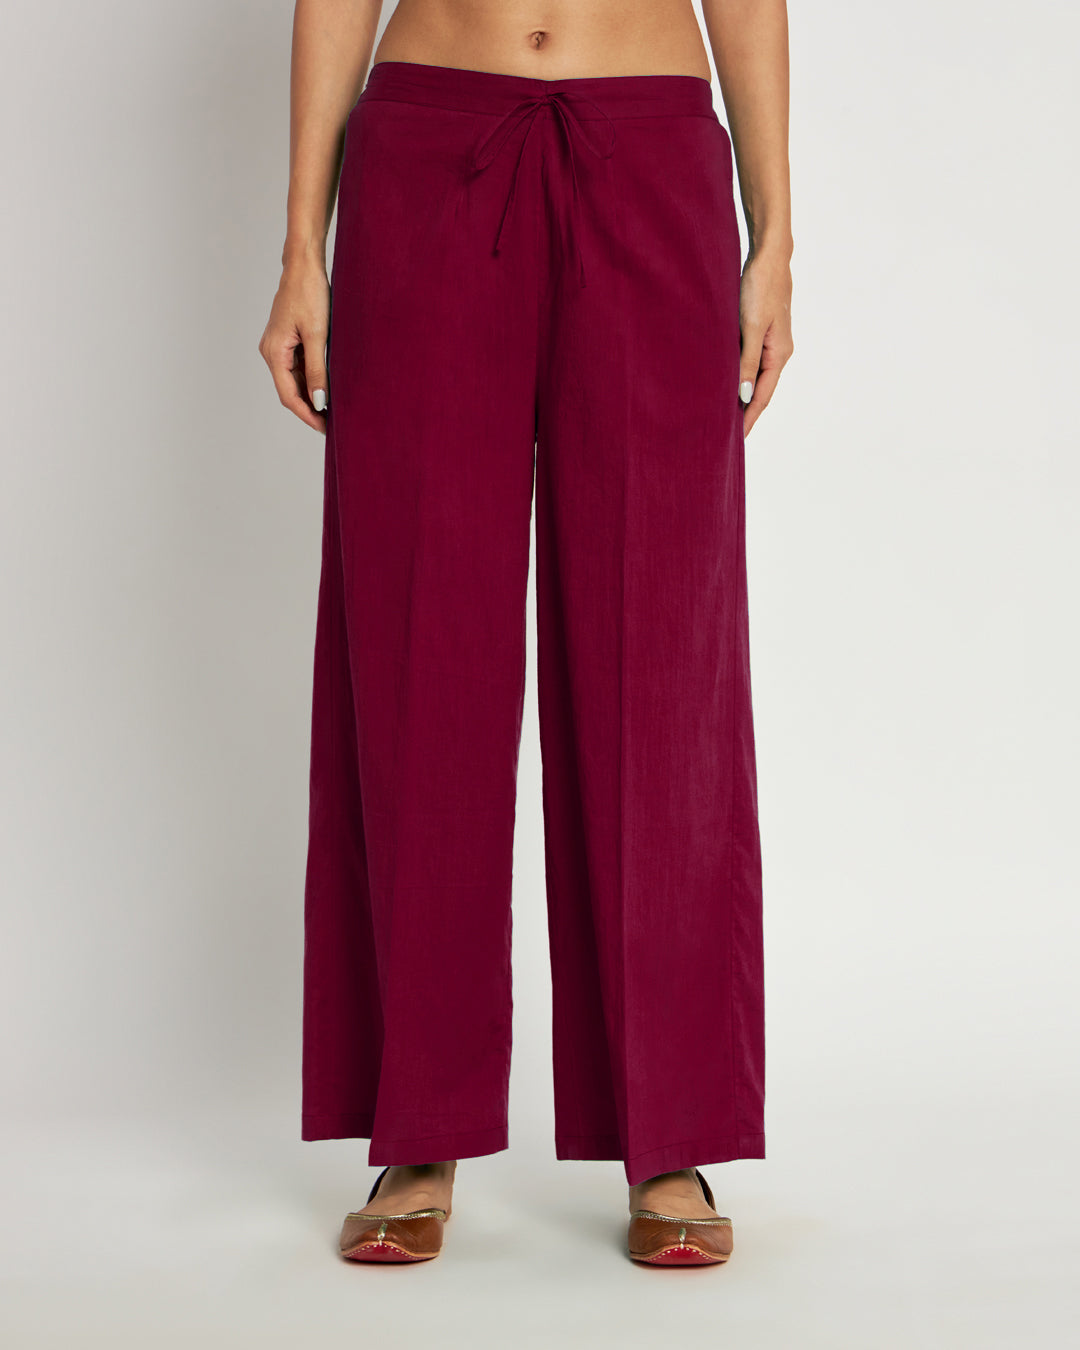 Combo: Russet Red & Midnight Blue Wide Pants- Set Of 2